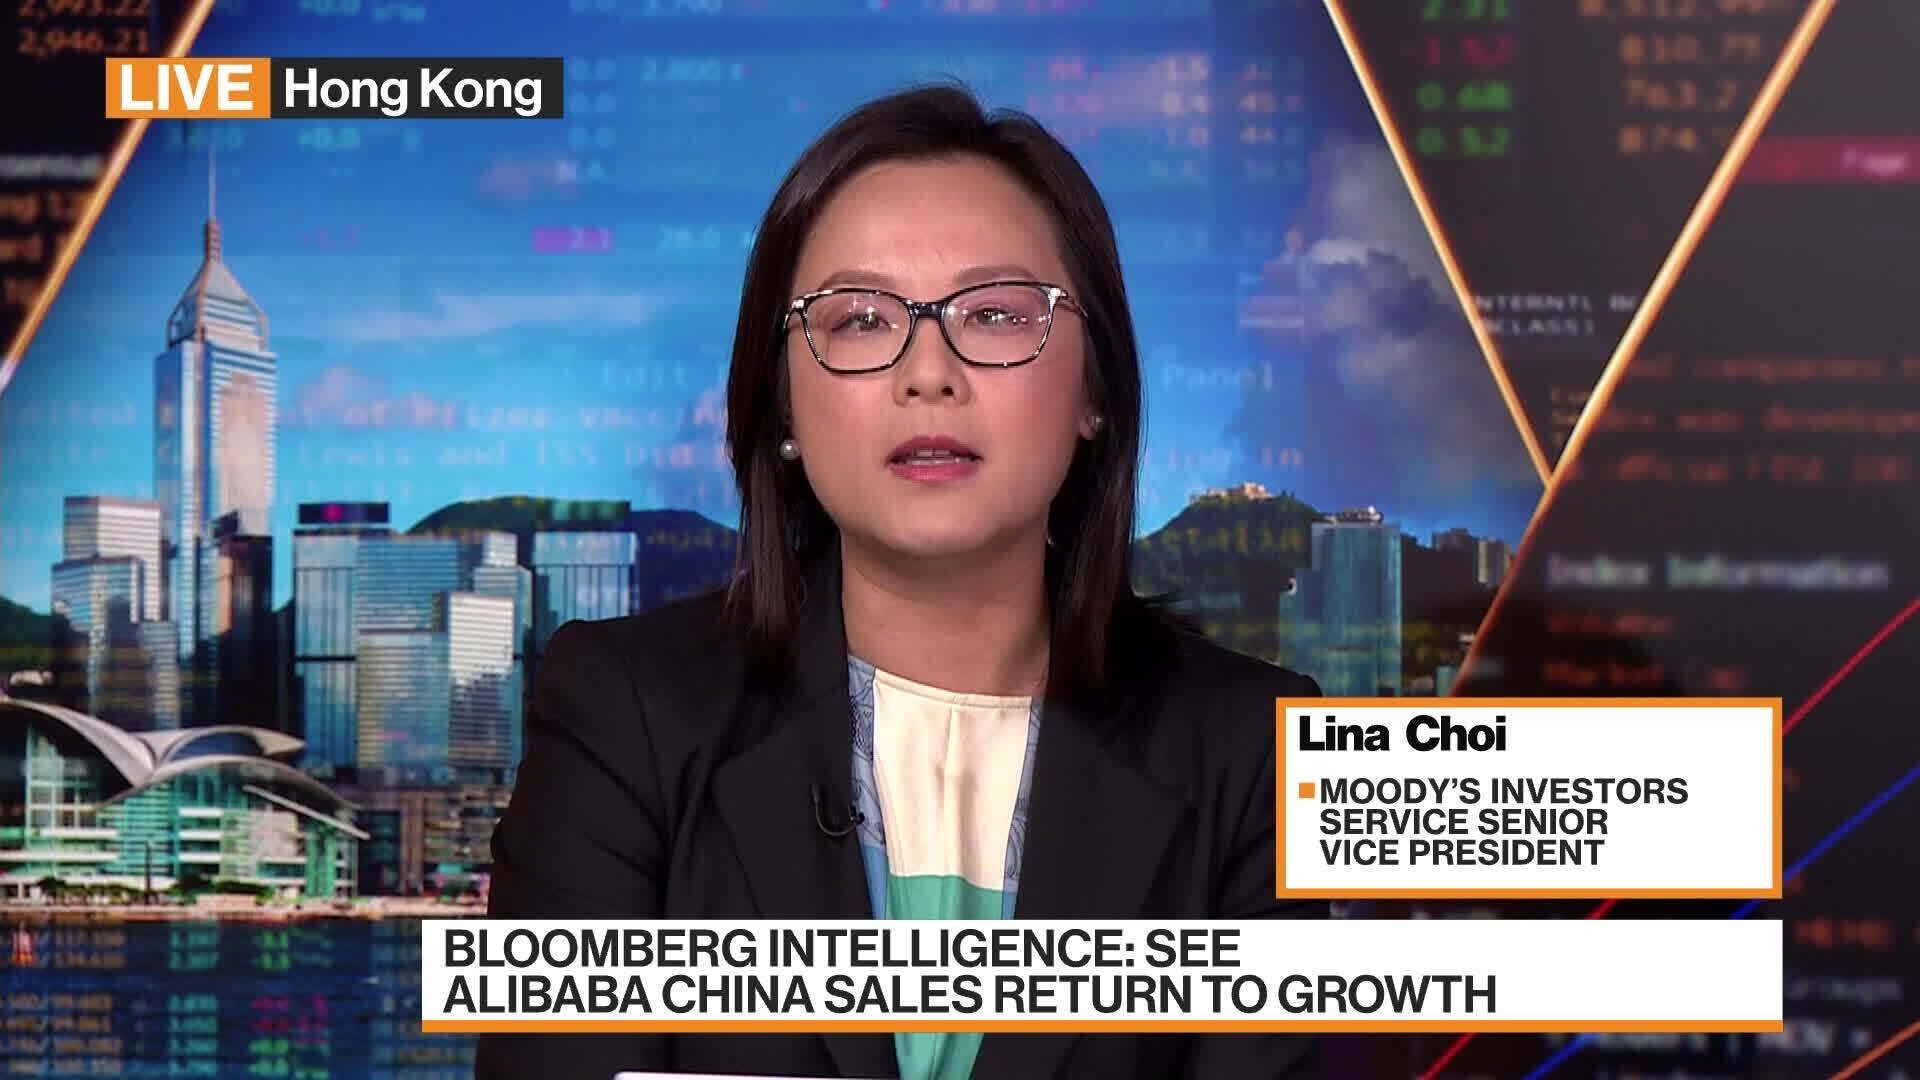 Watch How Jack Ma Crossed China's Red Lines - Bloomberg